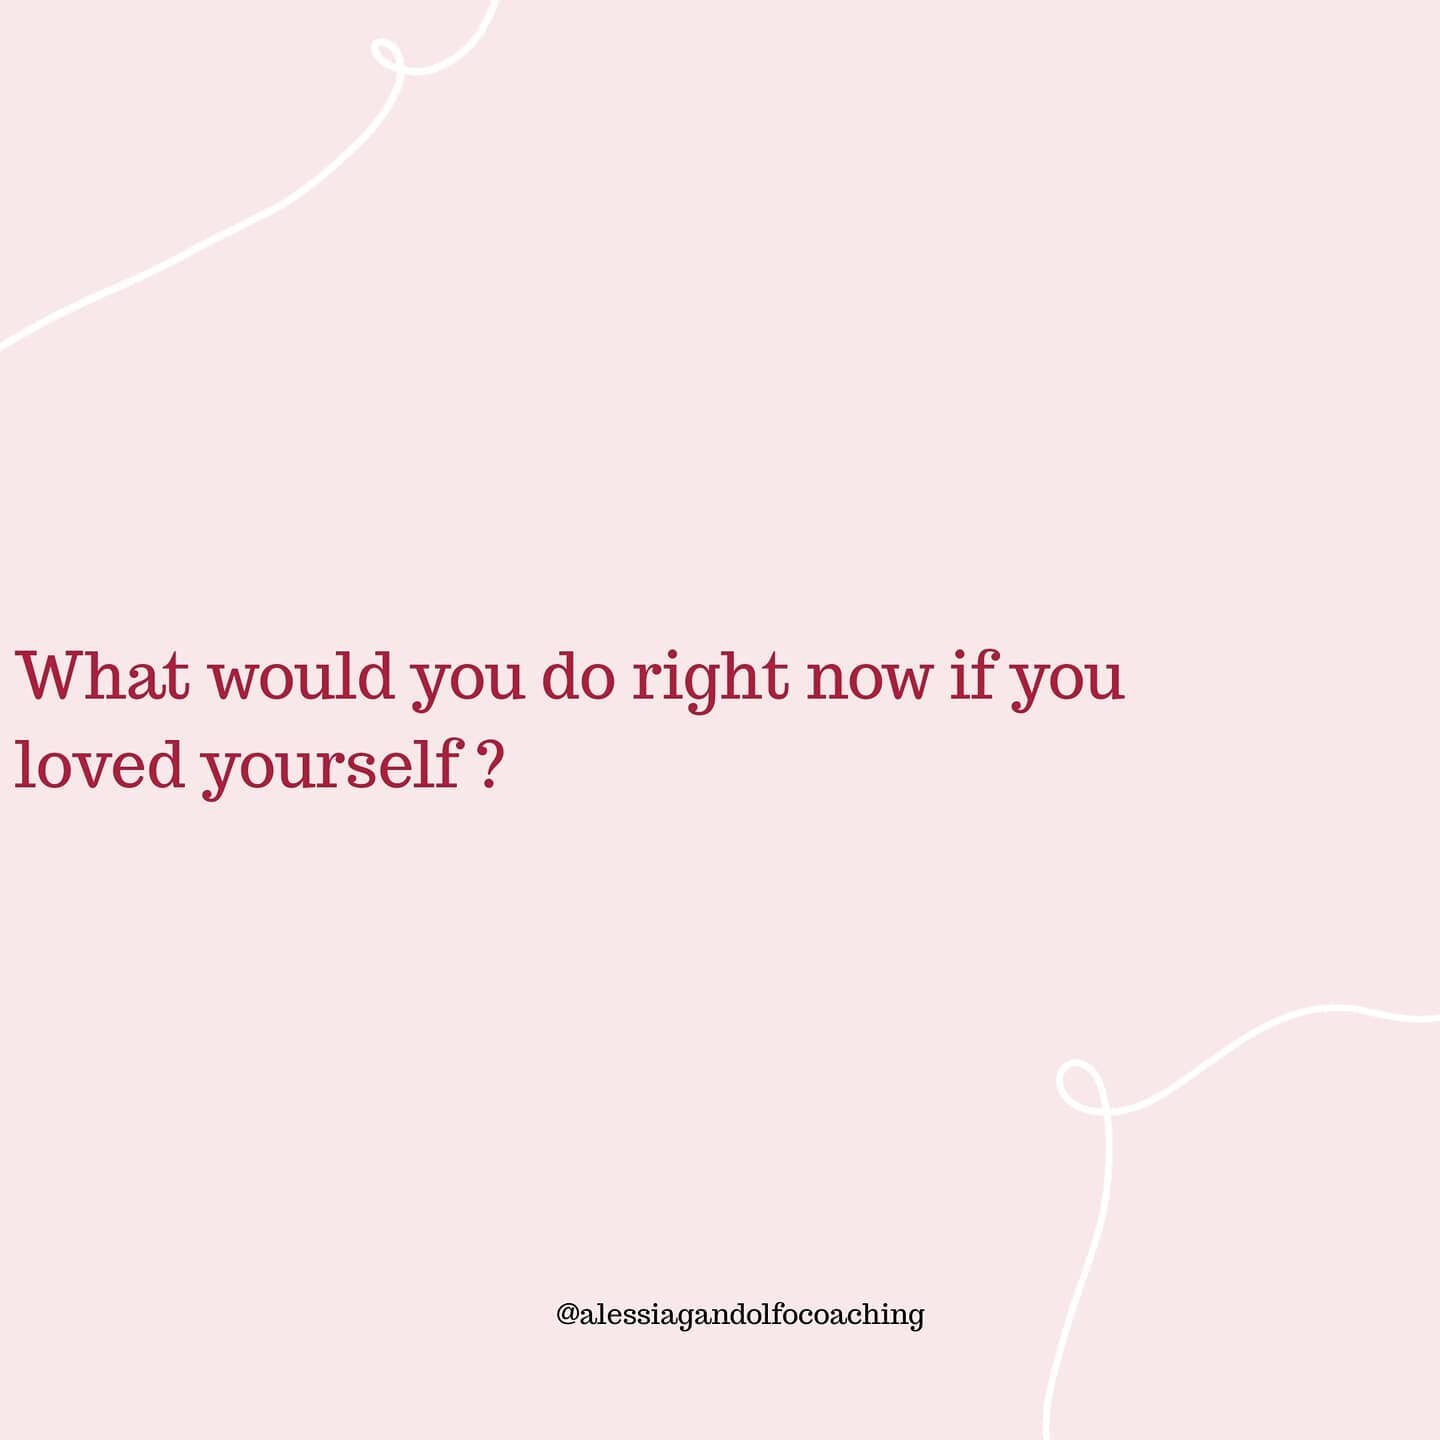 Would you stay in that relationship or would you let it go? 

Would you take the leap of faith and going fully in your business idea? 

Would you stay home and give yourself a bath and face mask? 

Would you go out and open up to people? 

Would you 